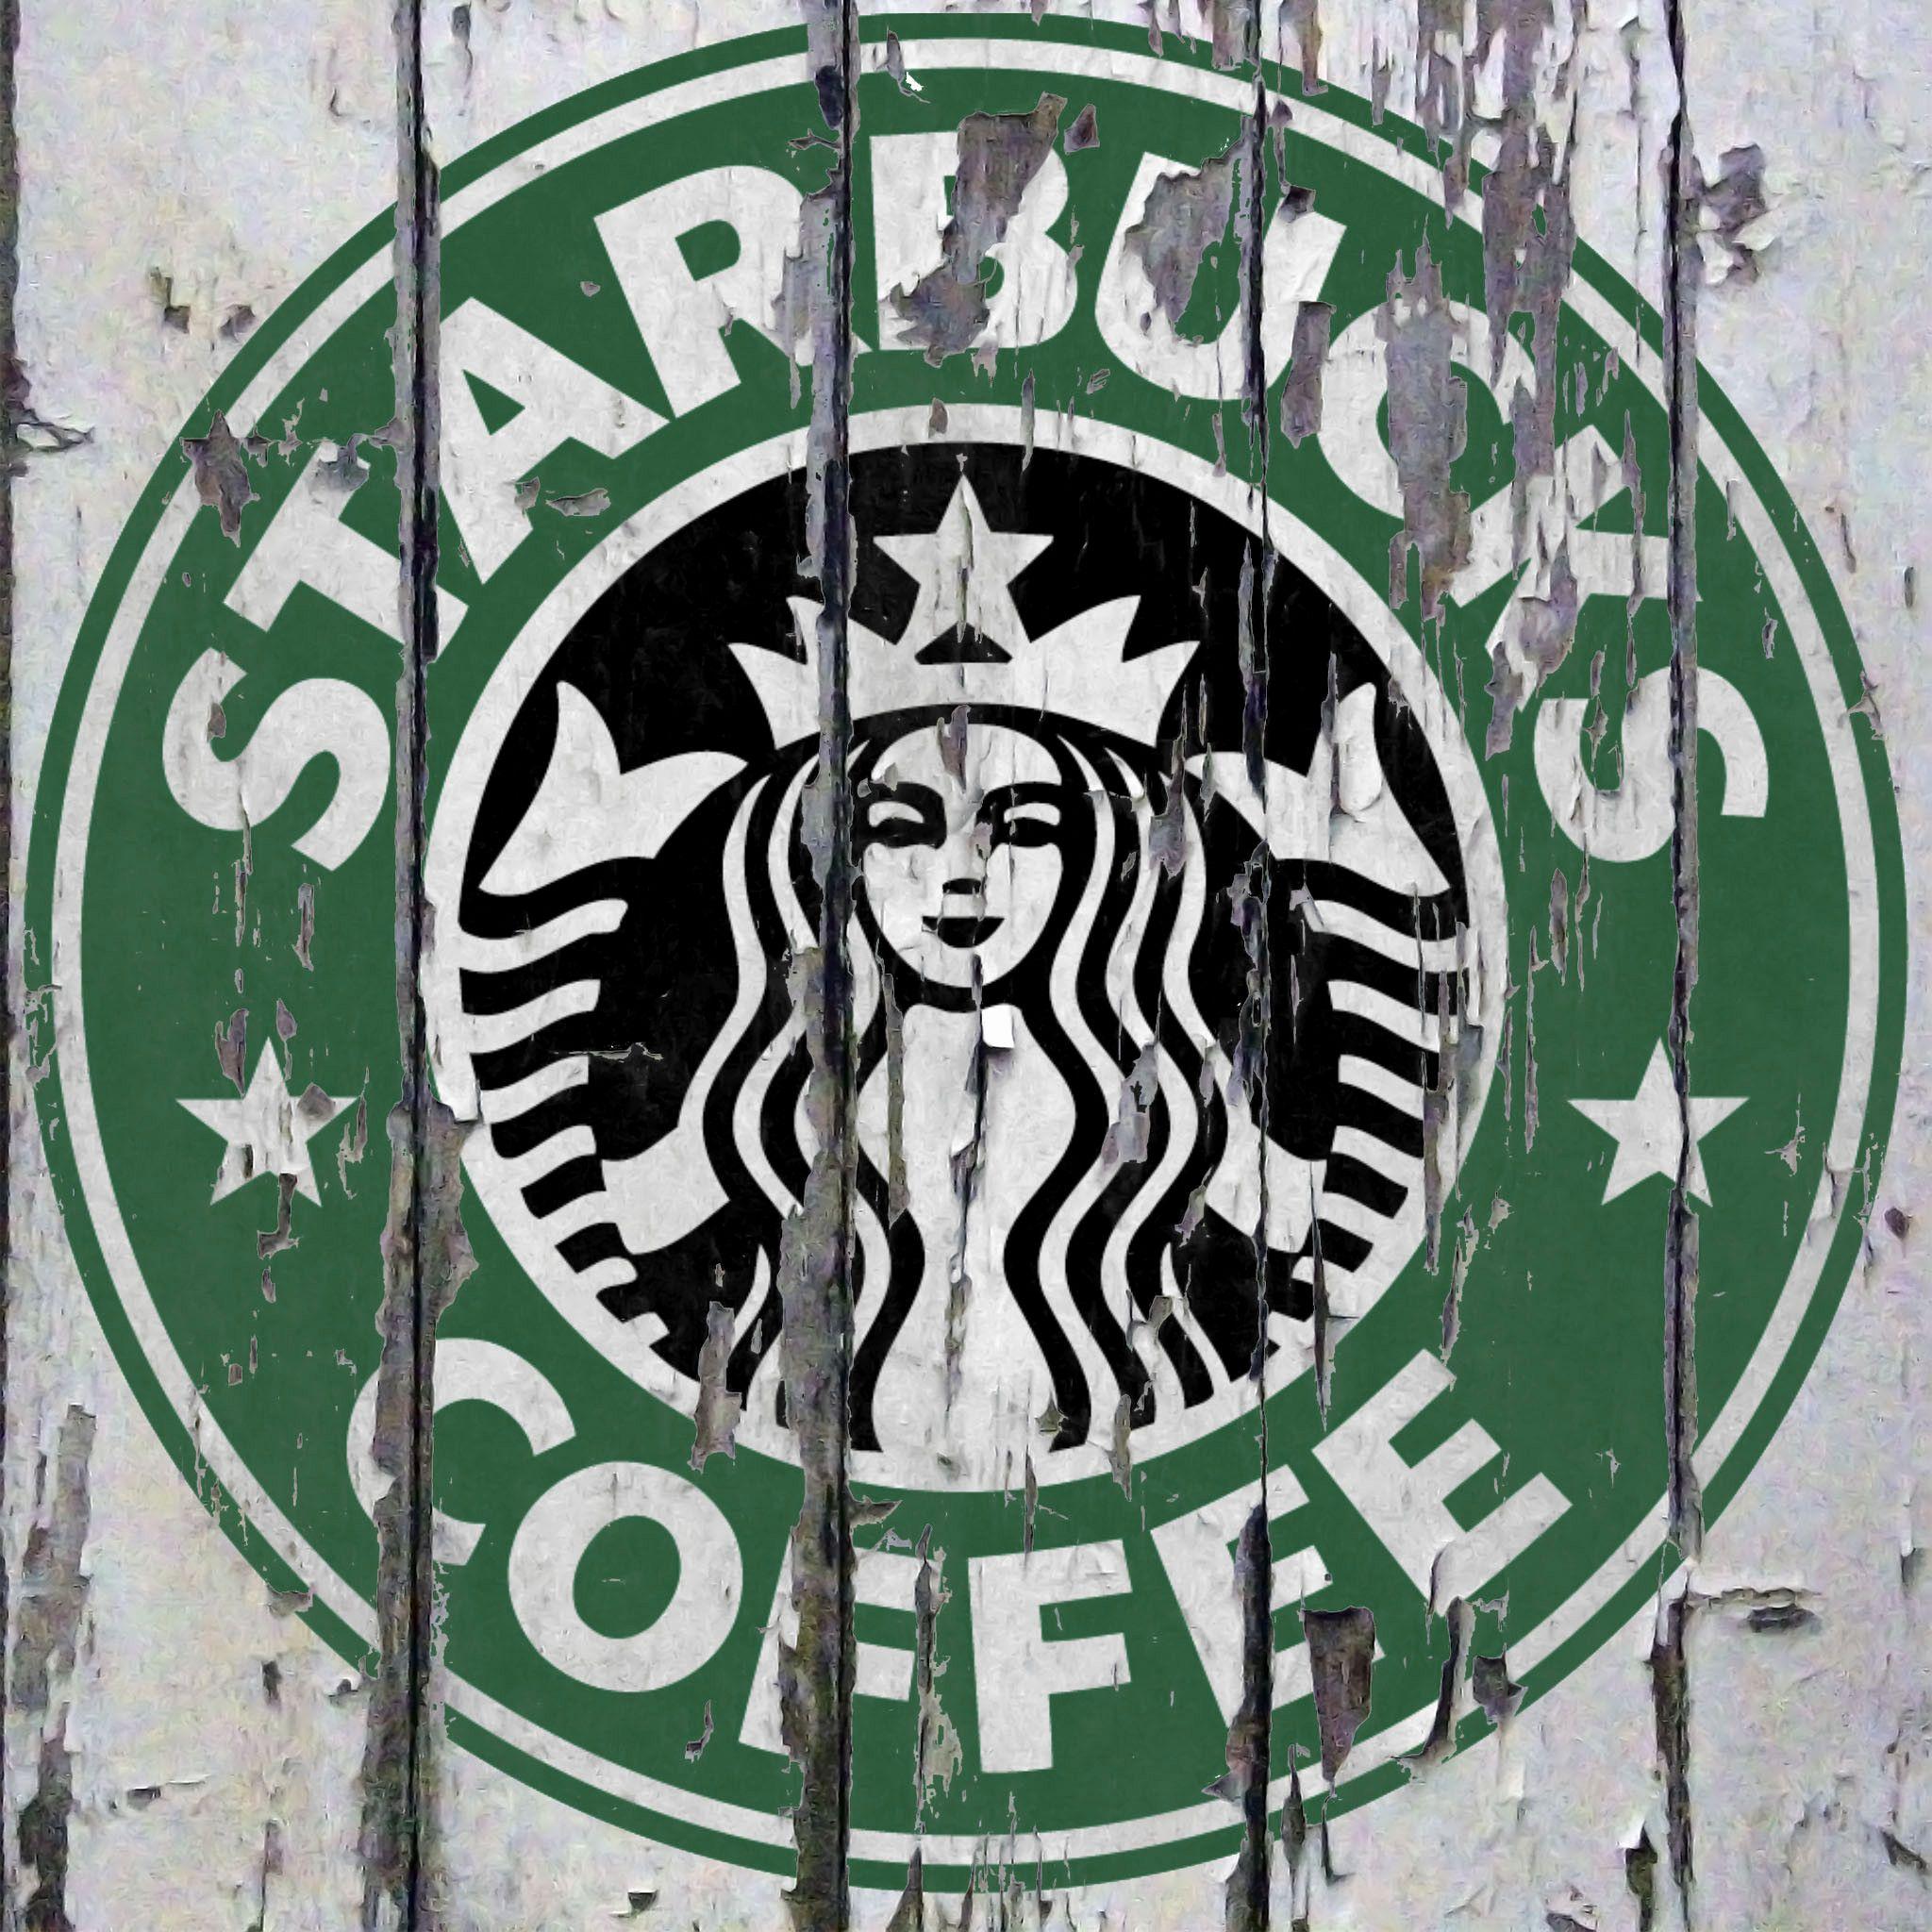 Starbucks Coffee Wallpaper Winter. How to Set Up New iPhone